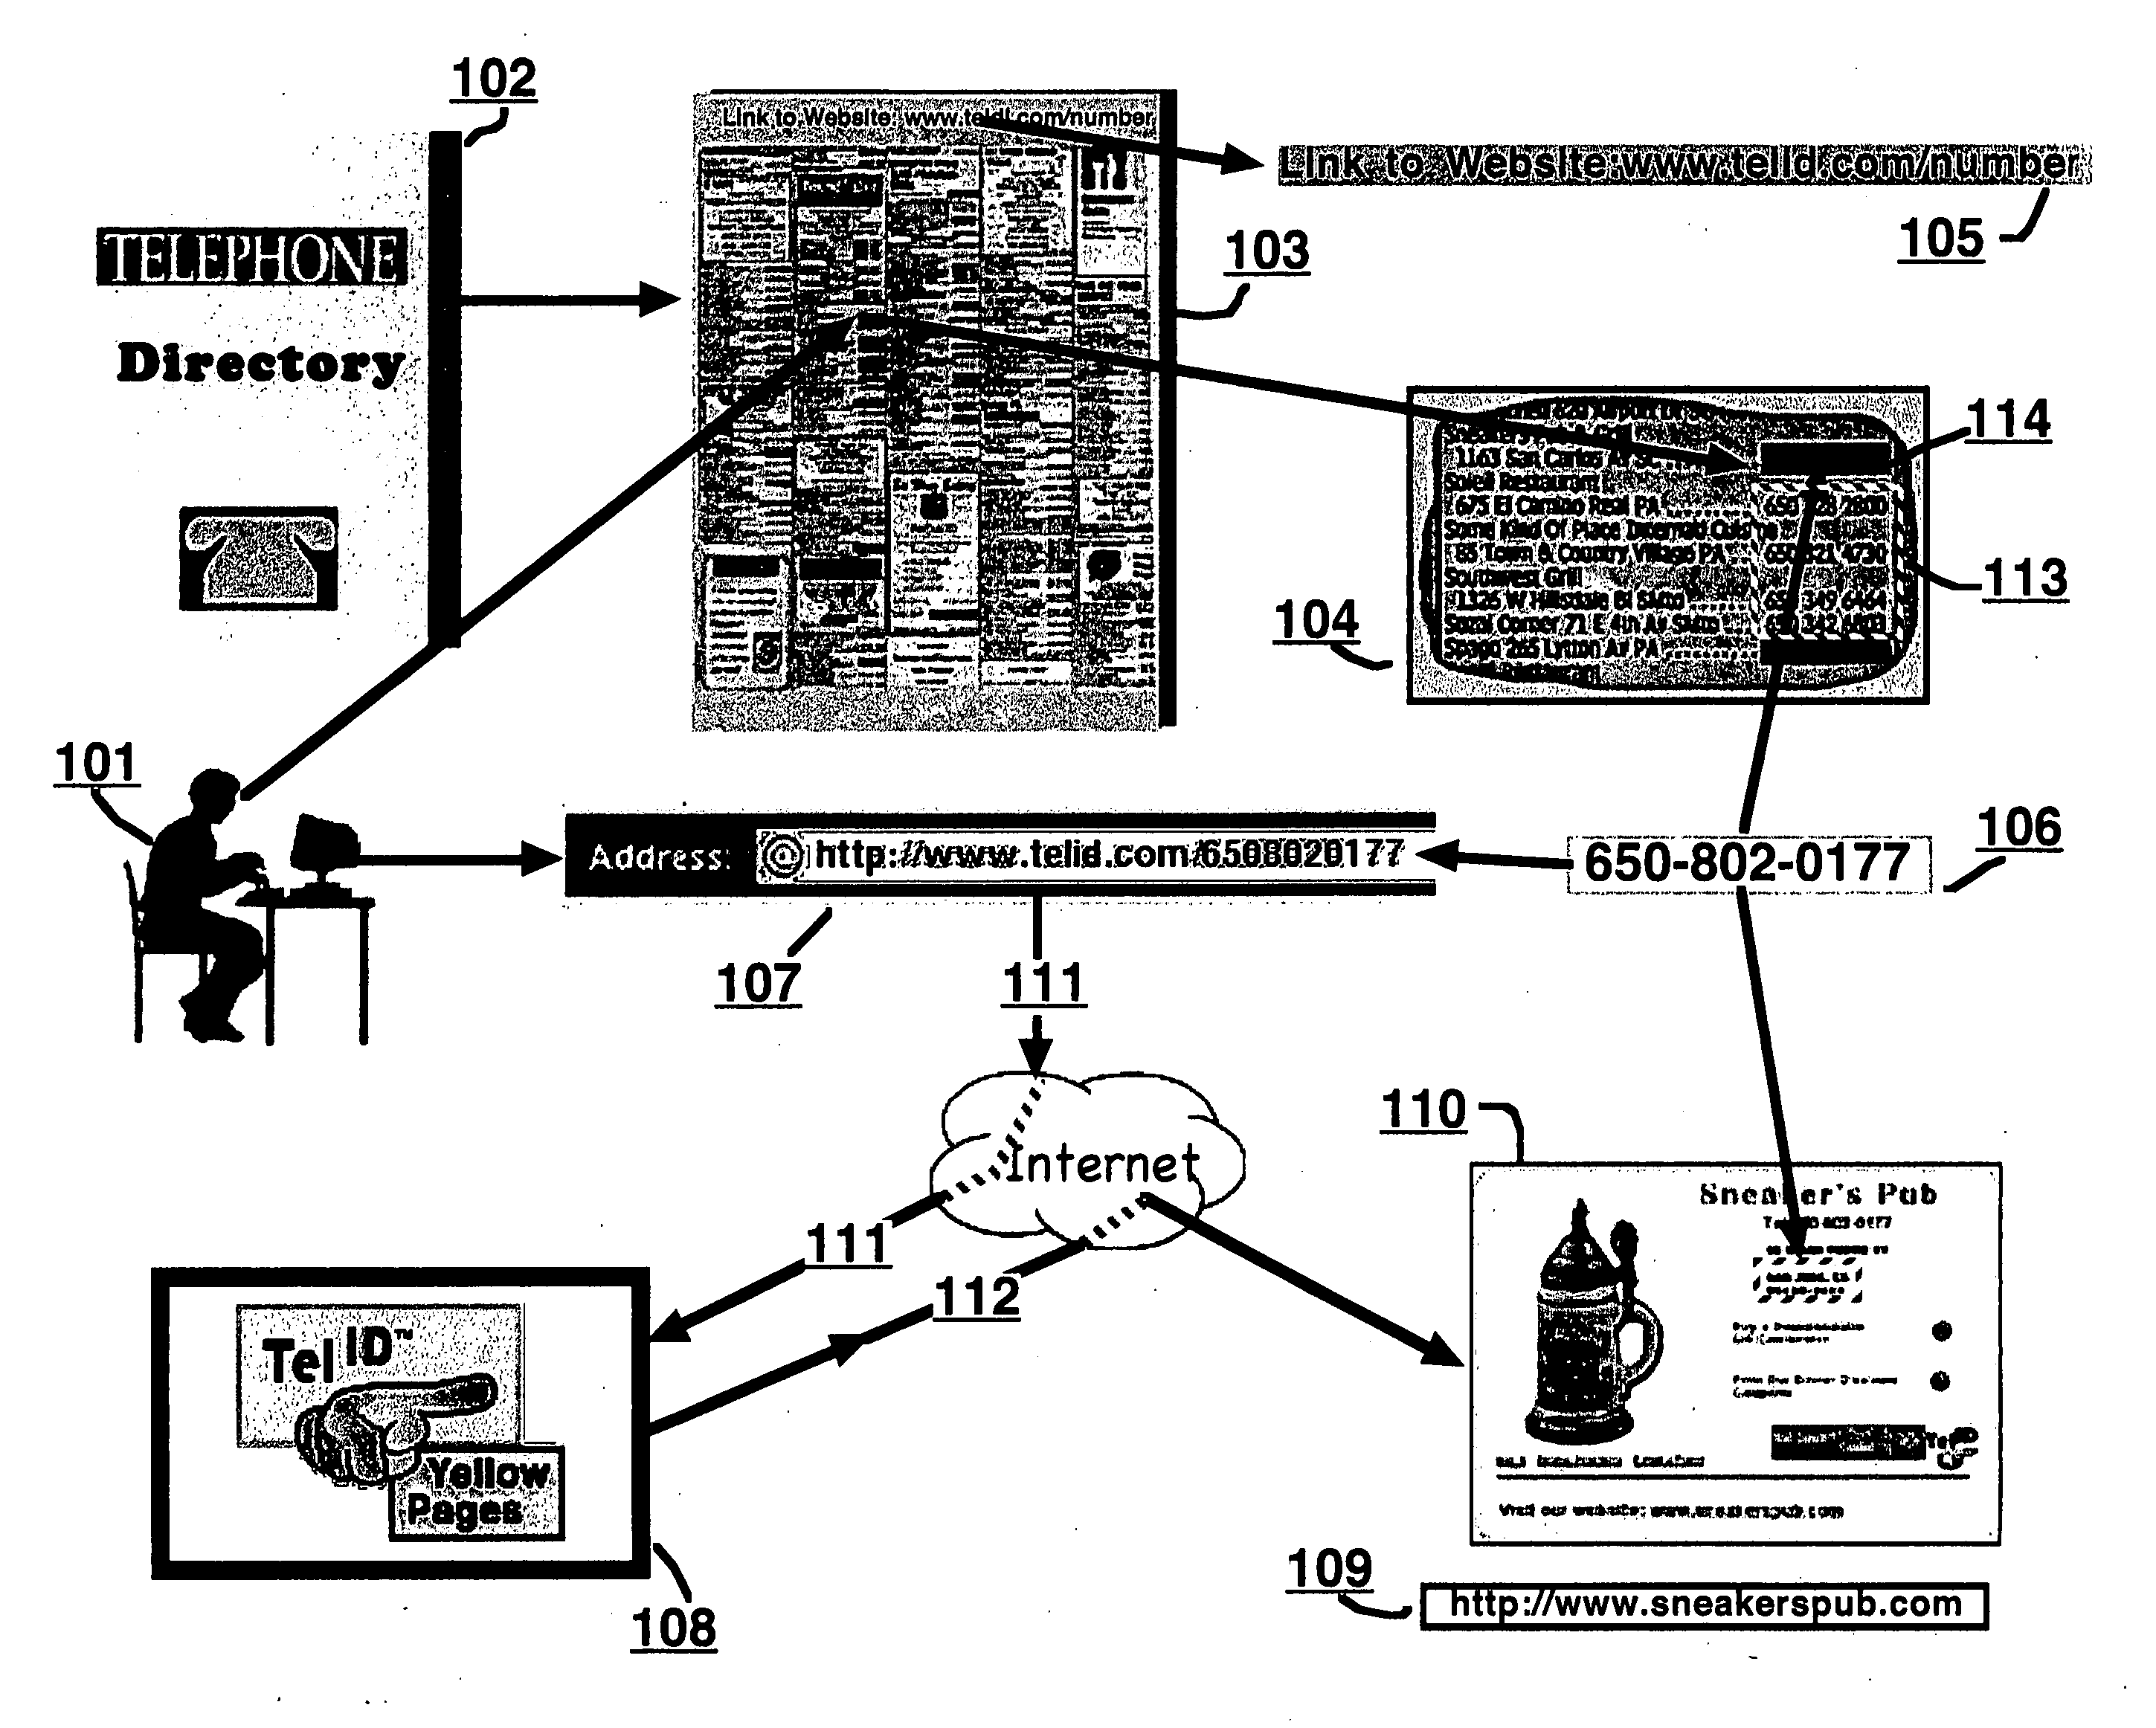 Linking method for printed telephone numbers identified by a non-indicia graphic delimiter